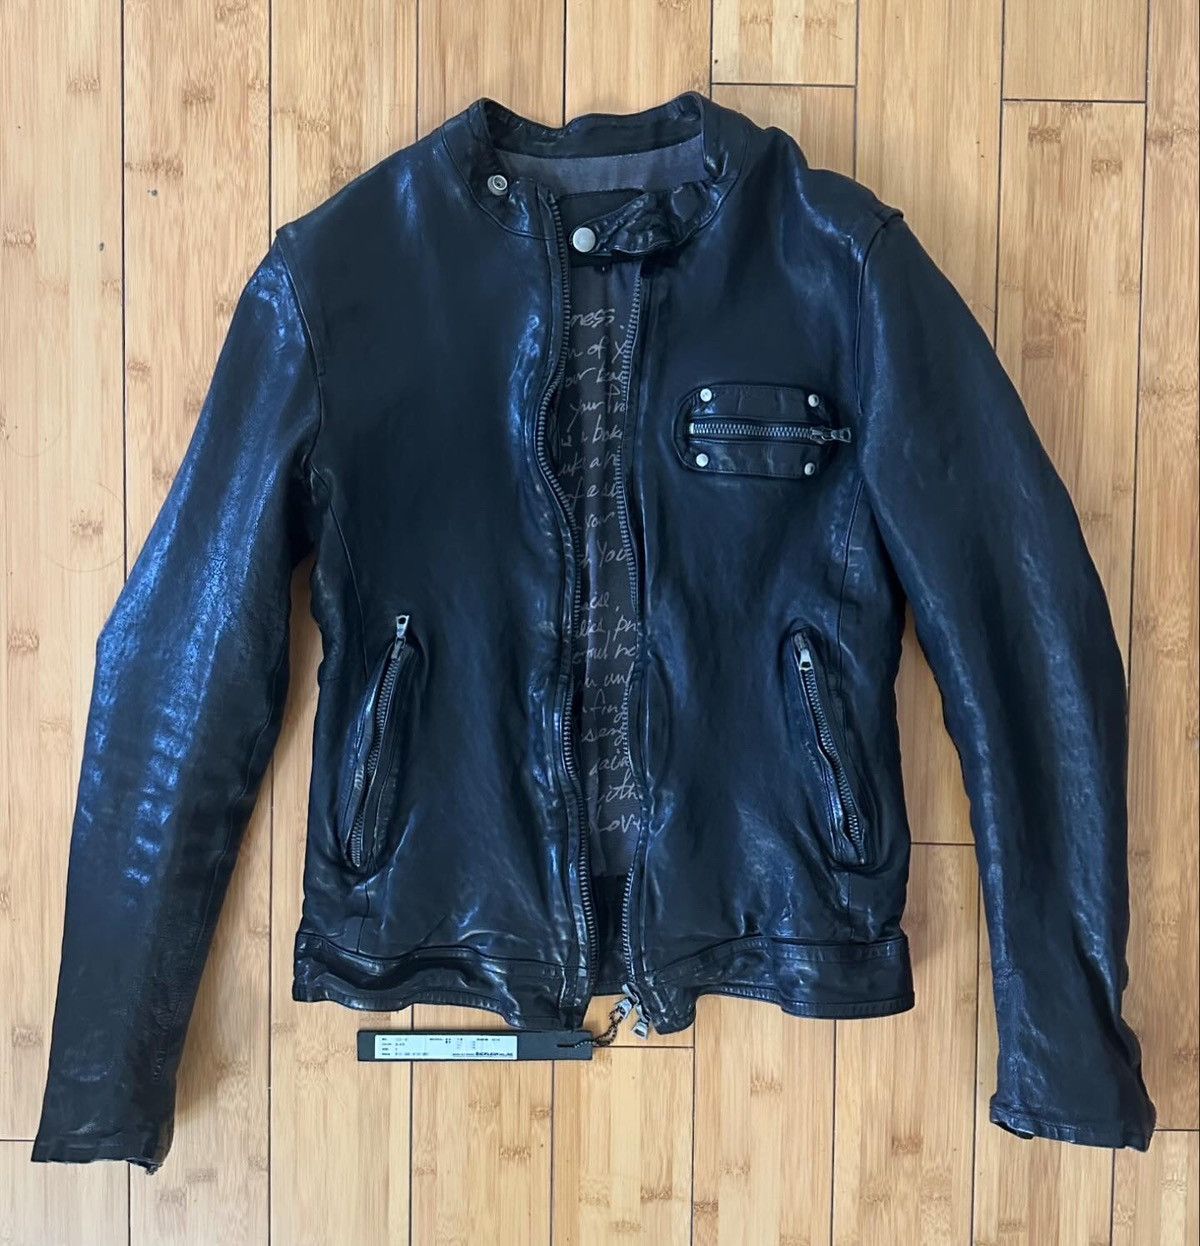 Archival Clothing Poem Calf Leather Moto Jacket | Grailed